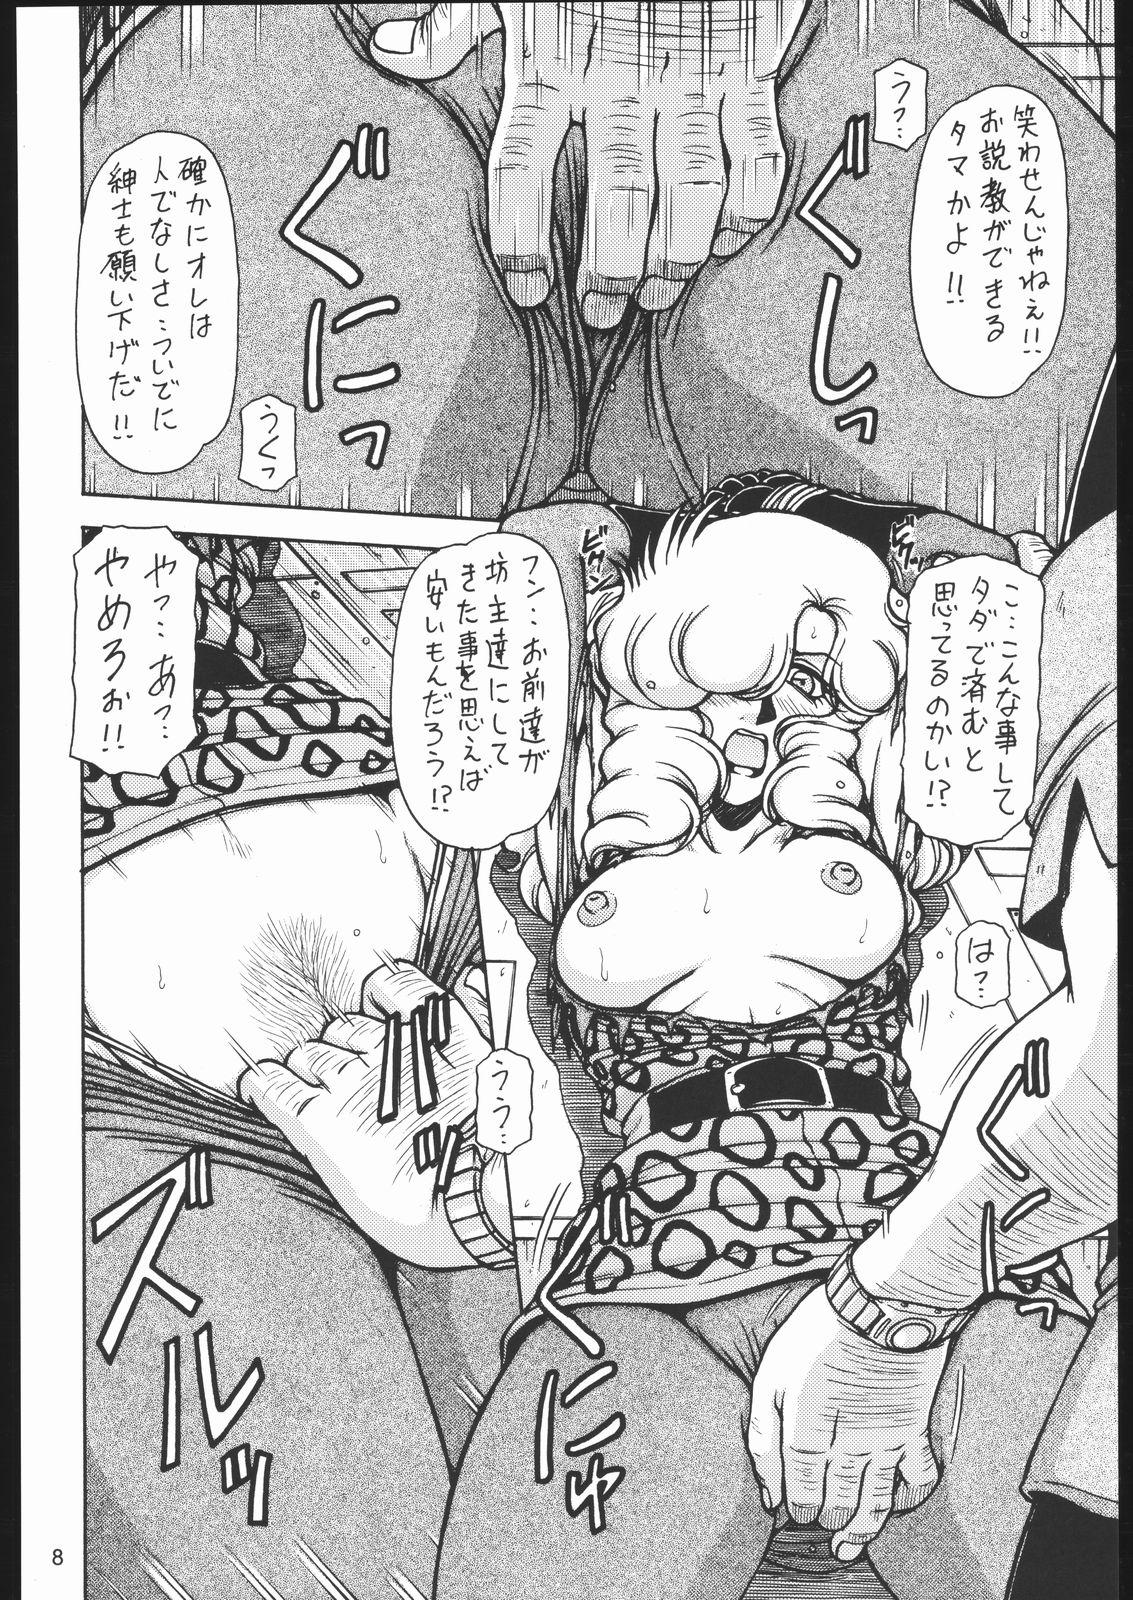 Bwc Red Muffler GG - Giant gorg Monster Dick - Page 7